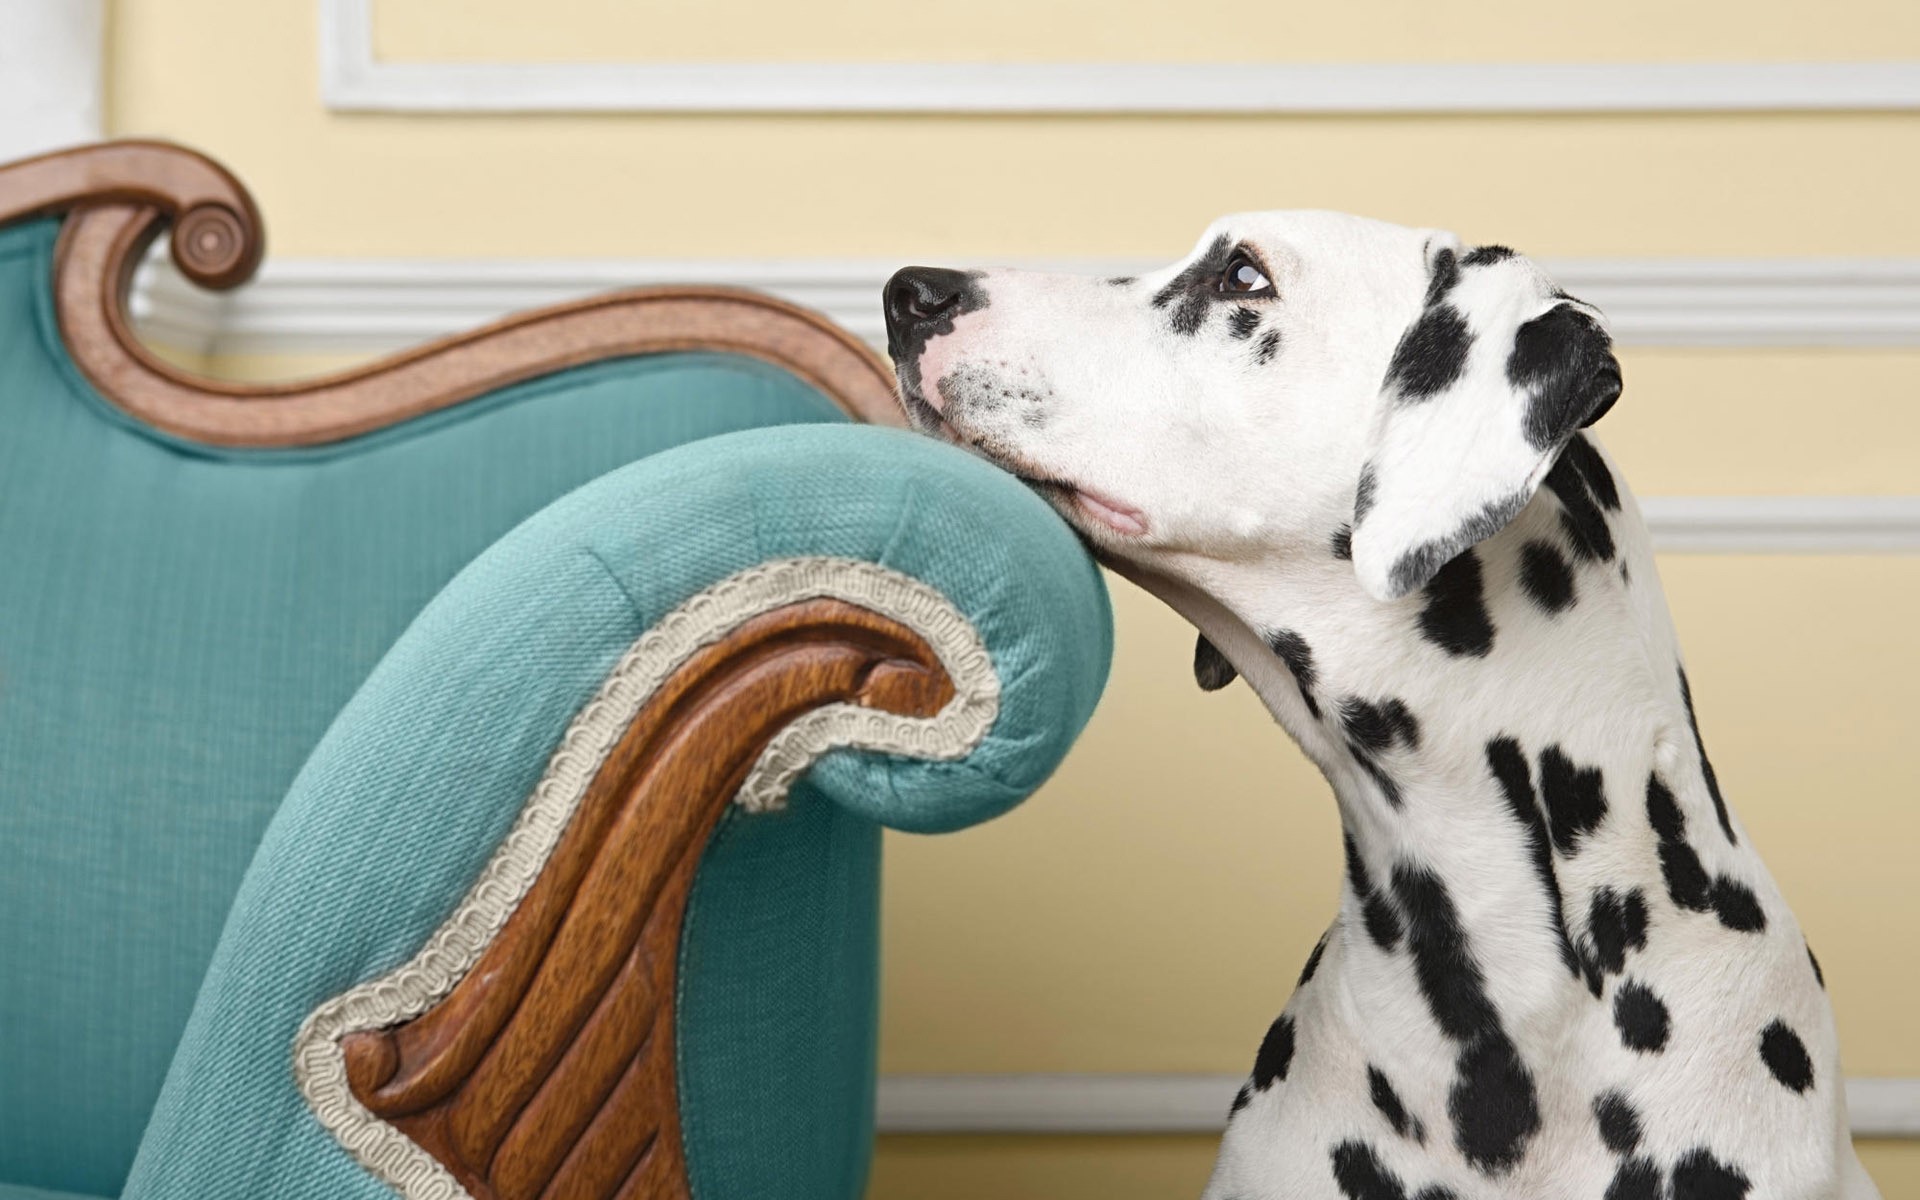 Sad dalmatian wallpapers and images - wallpapers, pictures, photos